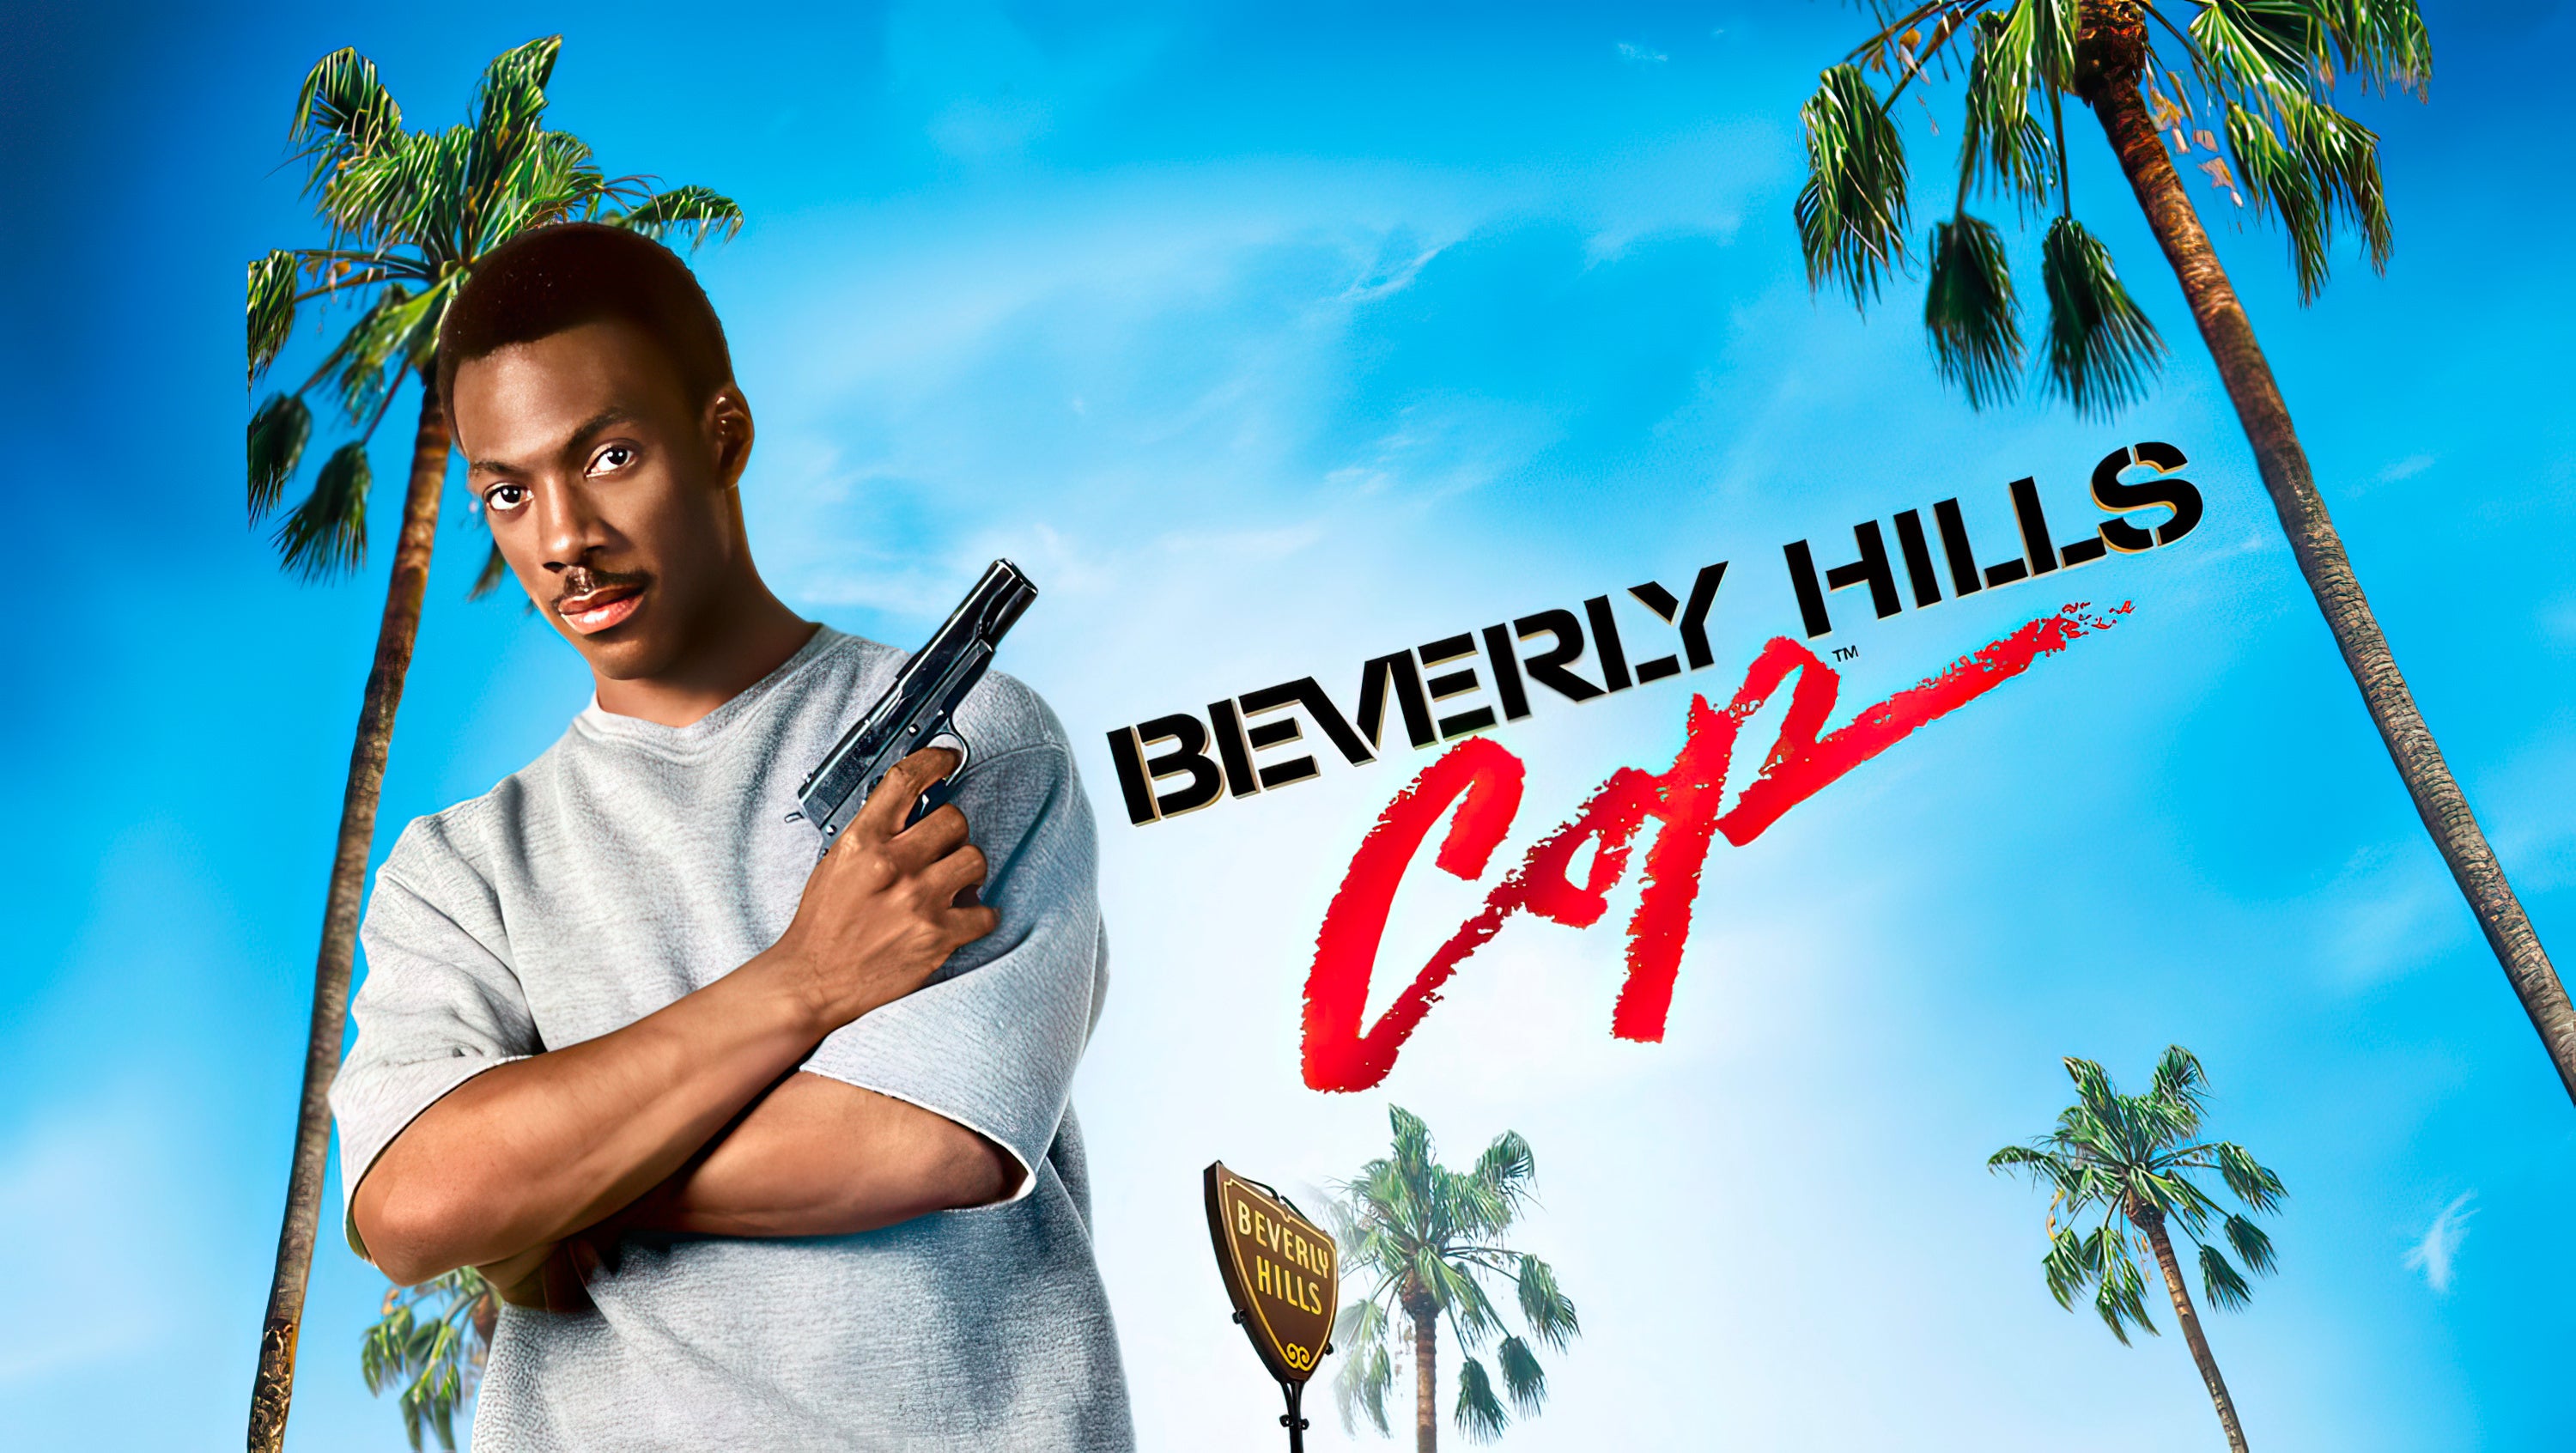 Beverly Hills Cop Script Screenplay - Image of Movie Poster